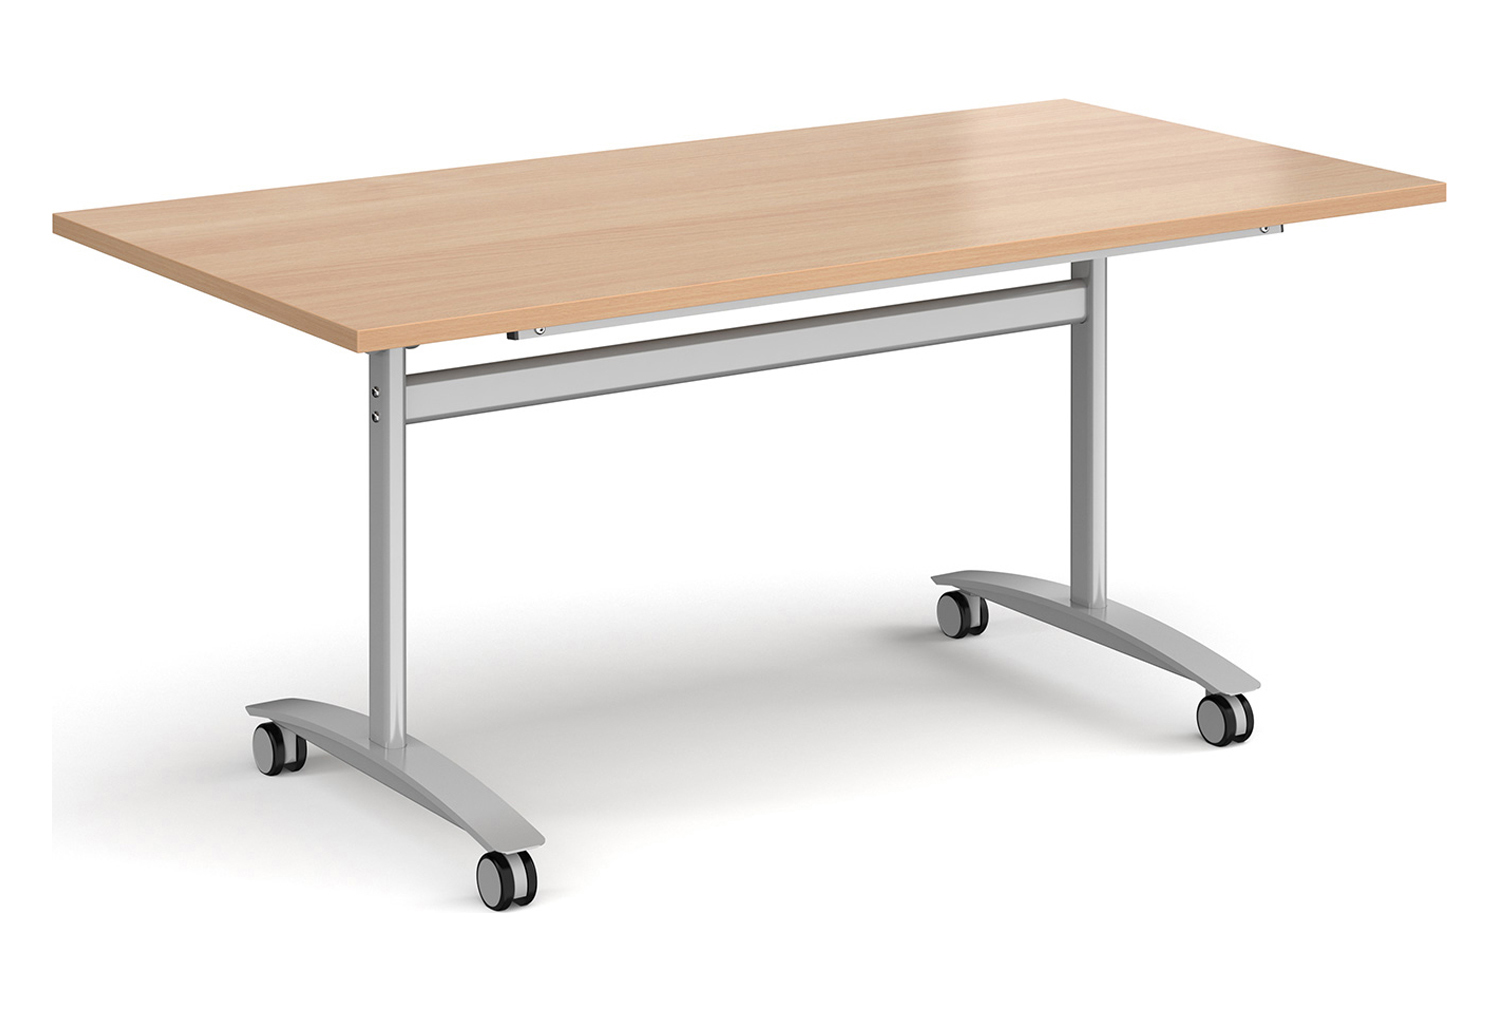 Carousel Rectangular Flip Top Meeting Tables, 160wx80dx73h (cm), Silver Frame, Beech, Express Delivery